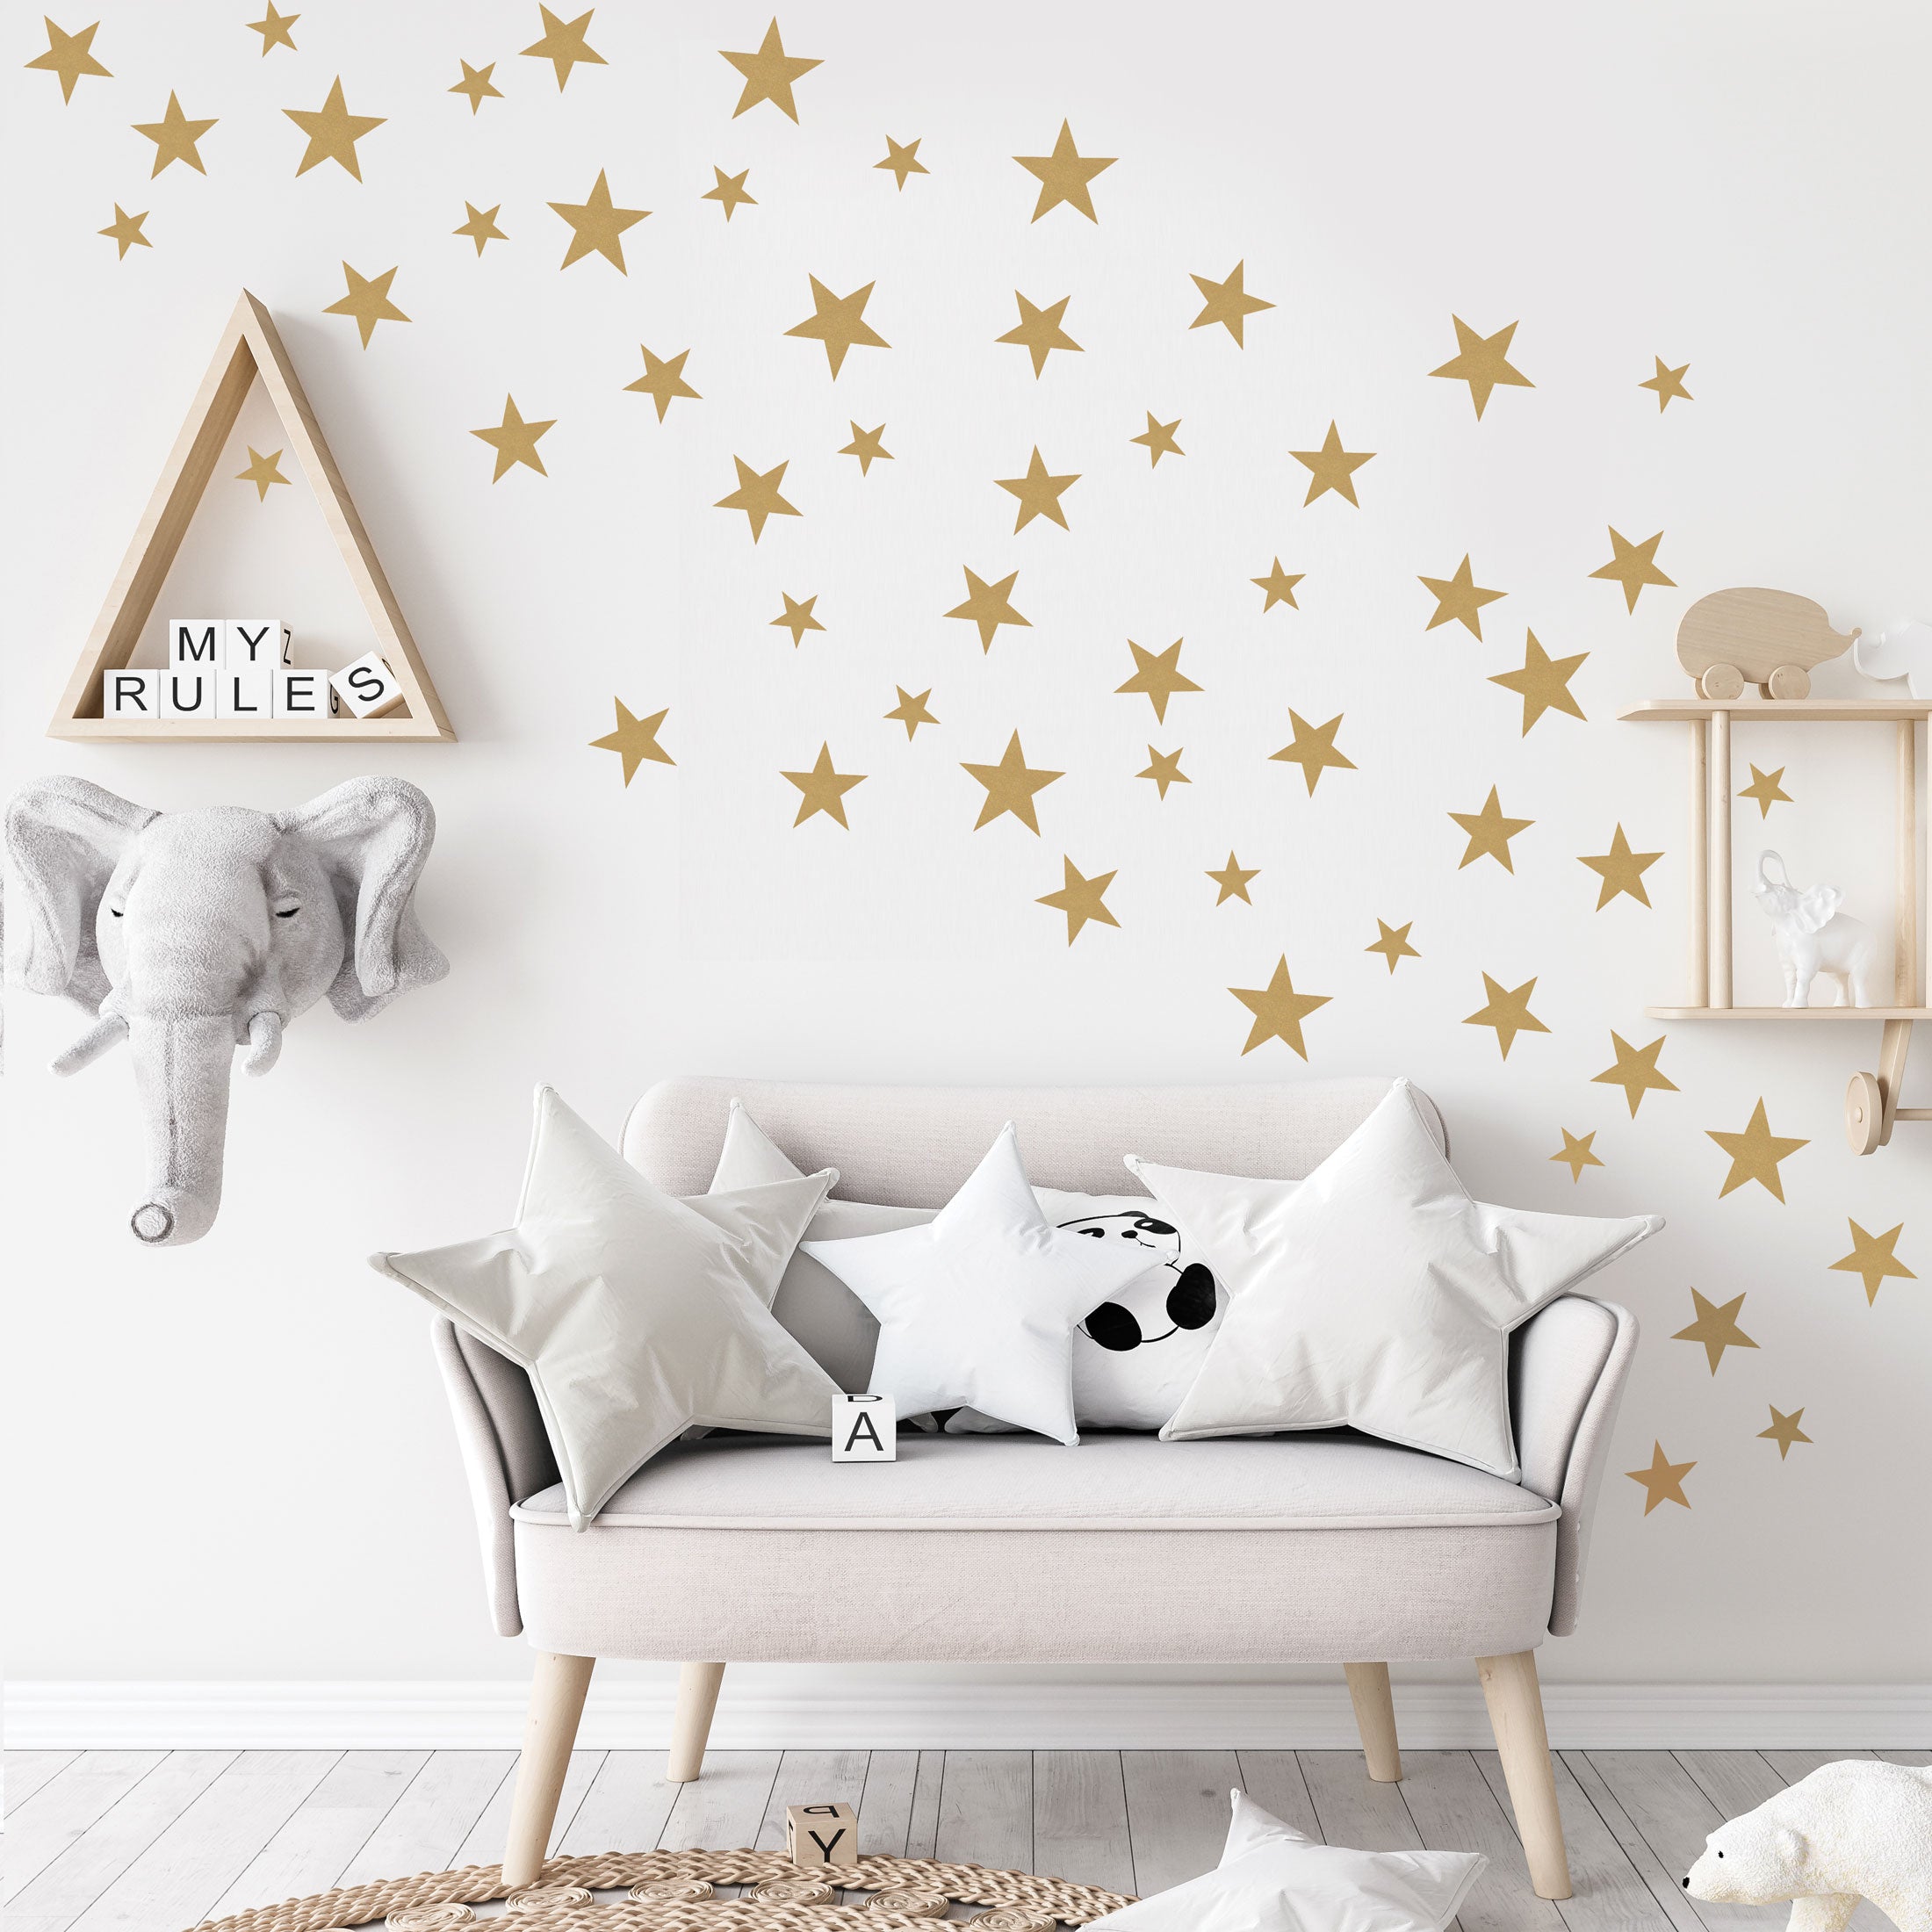 4 Metallic Gold 5 in Number Stickers Backdrop Wall Decorations